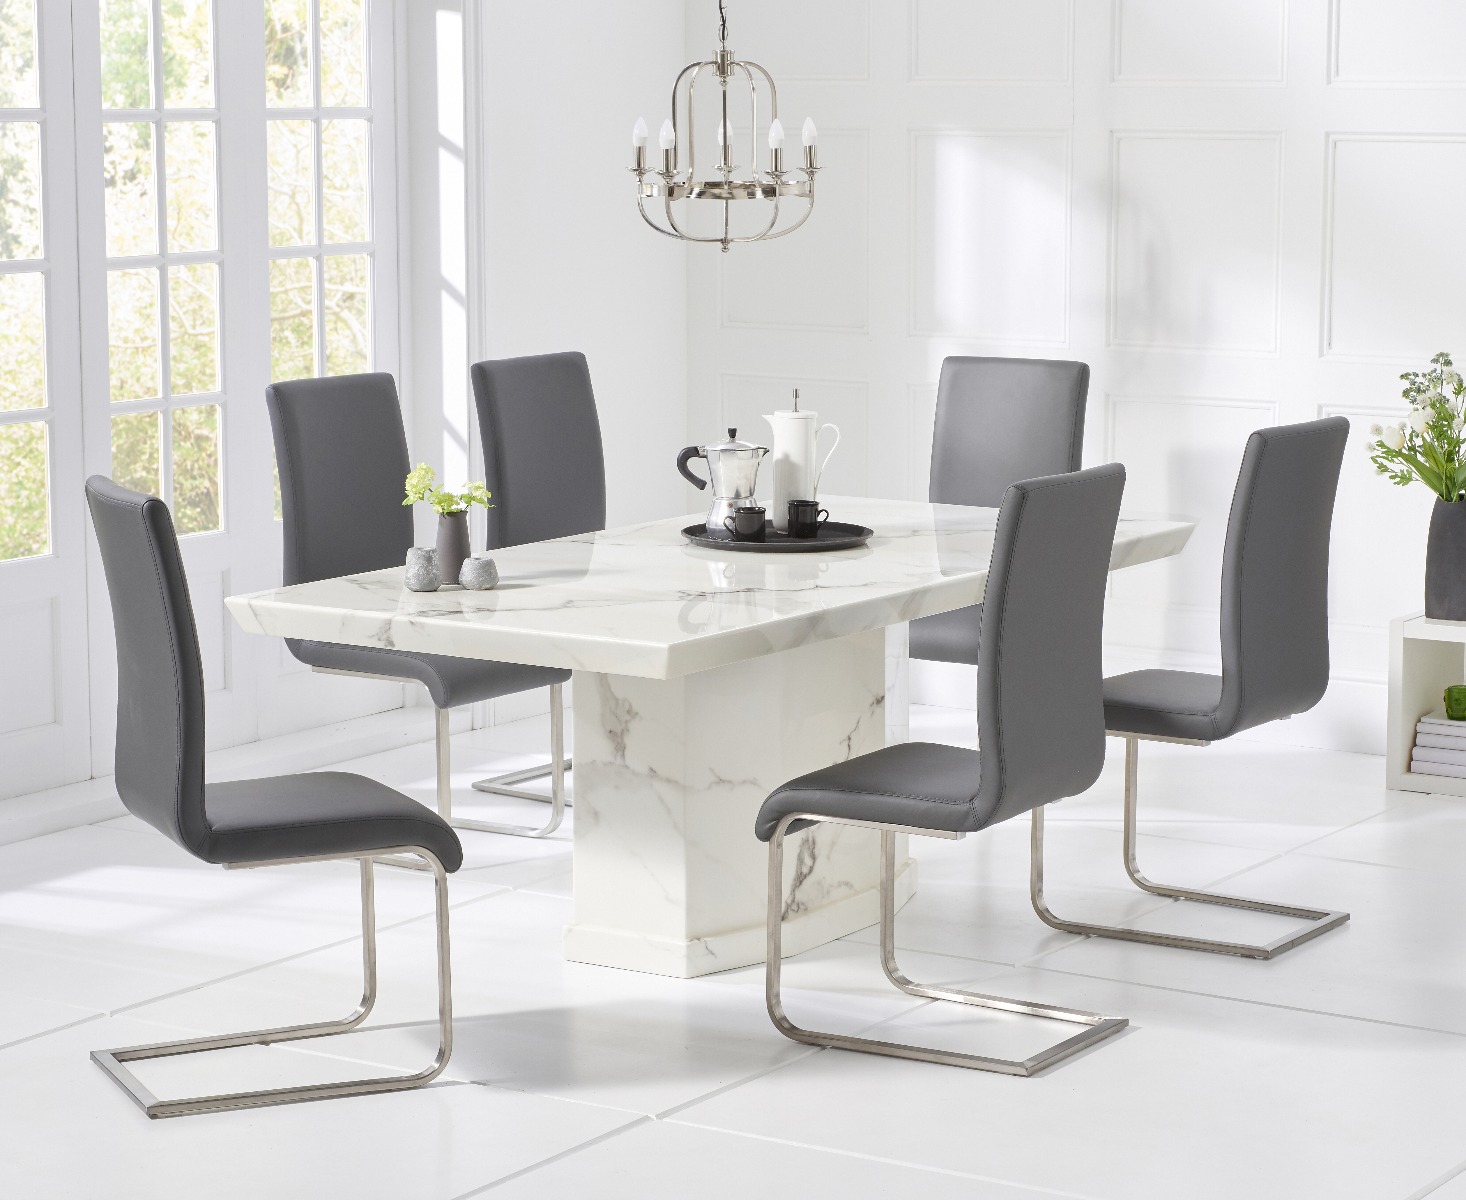 Carvelle 200cm White Pedestal Marble Dining Table With 8 White Malaga Chairs